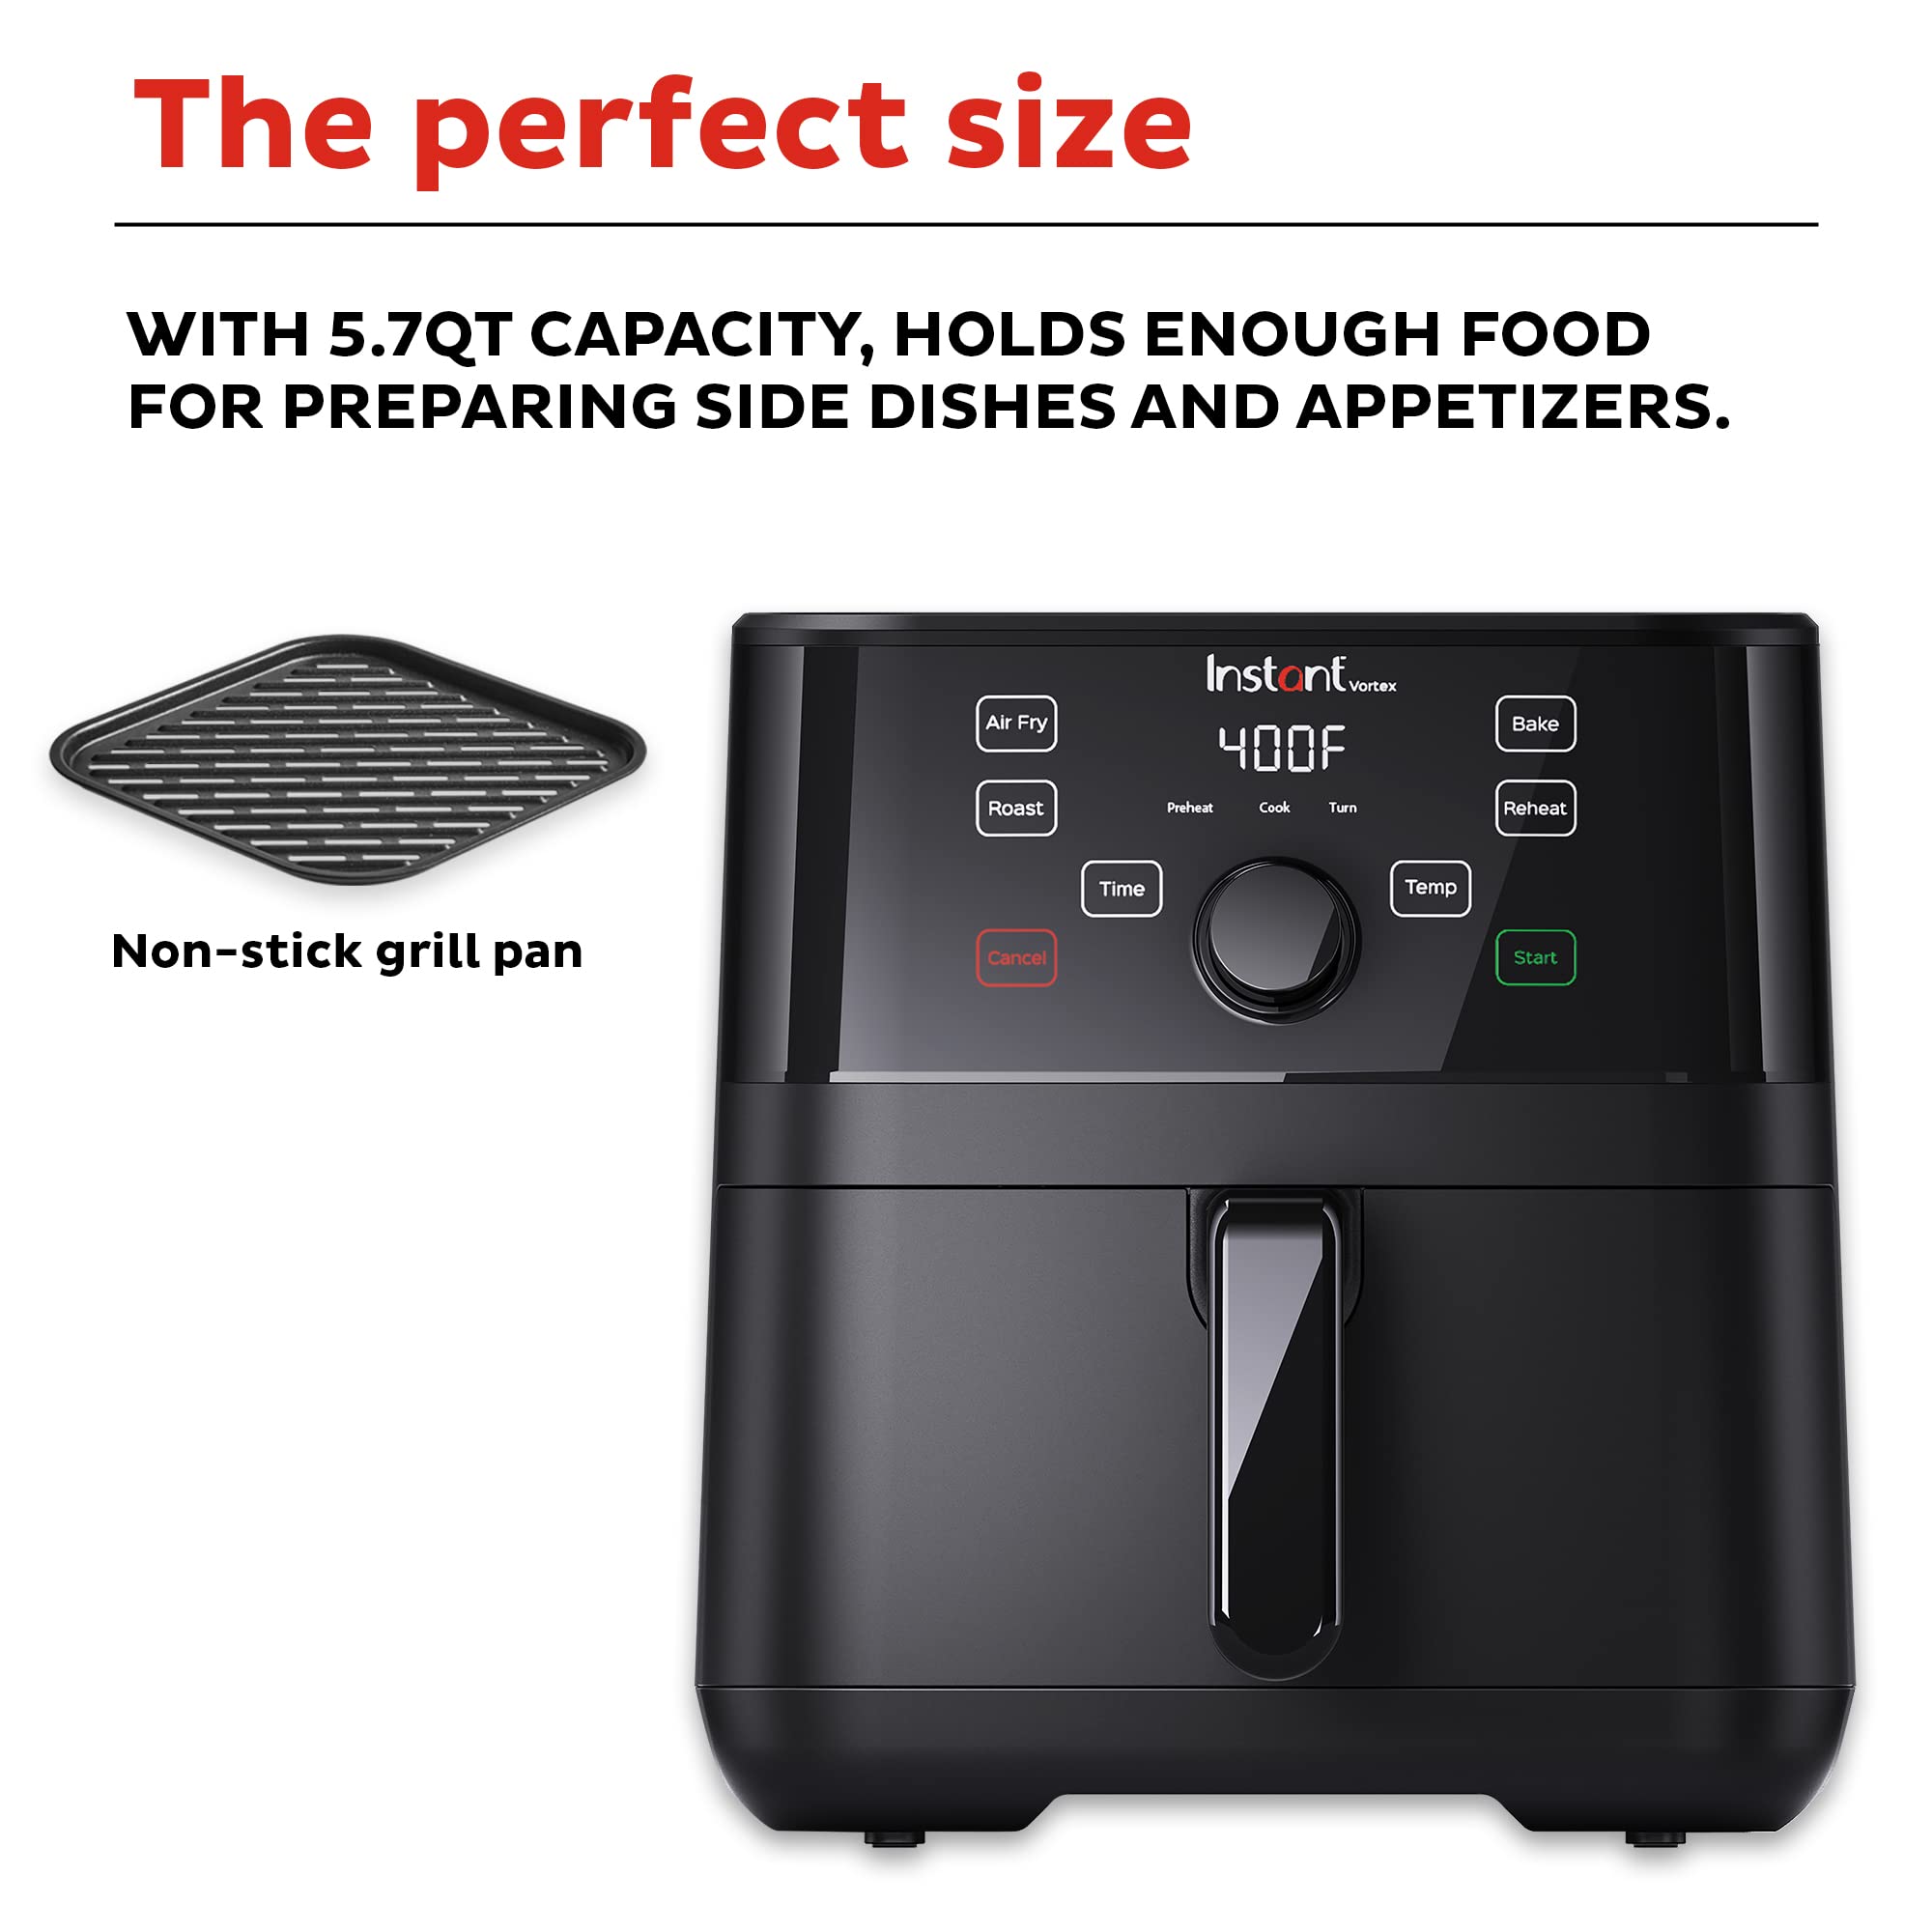 Instant Vortex 5.7QT Air Fryer Oven Combo, From the Makers of Instant Pot, Customizable Smart Cooking Programs, Digital Touchscreen, Nonstick and Dishwasher-Safe Basket, App with over 100 Recipes